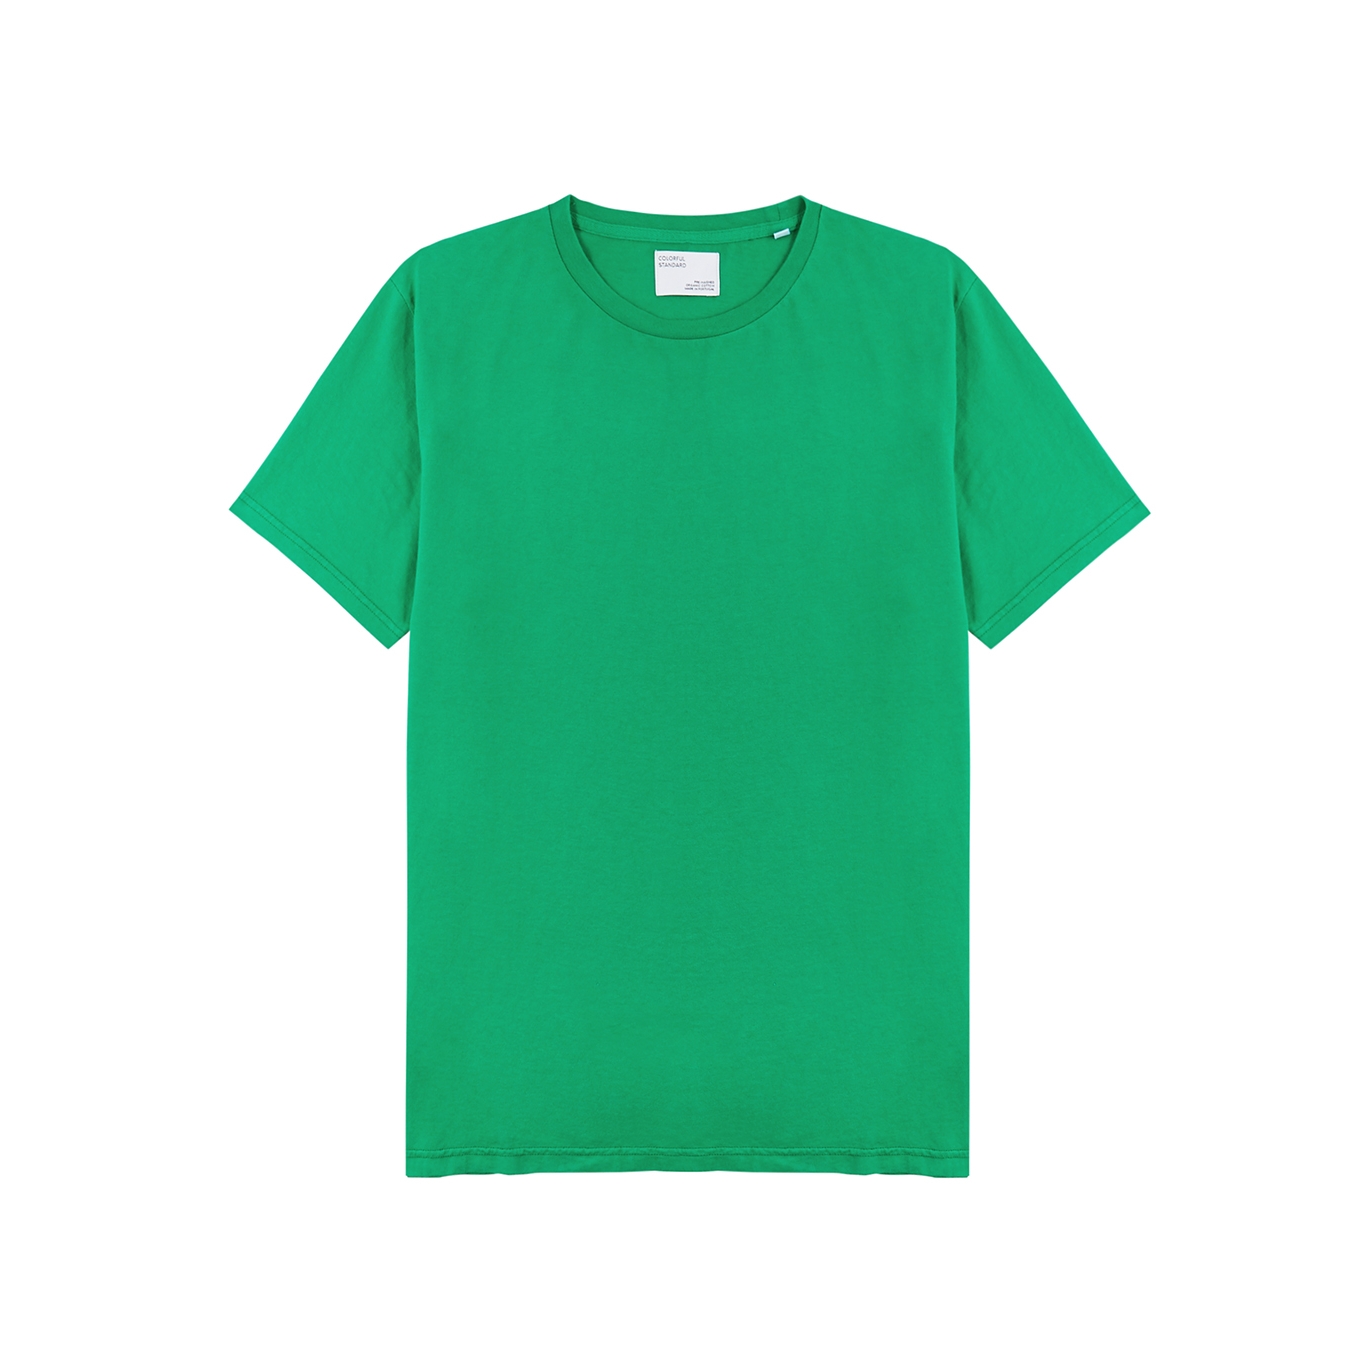 Colorful Standard Green Cotton T-shirt